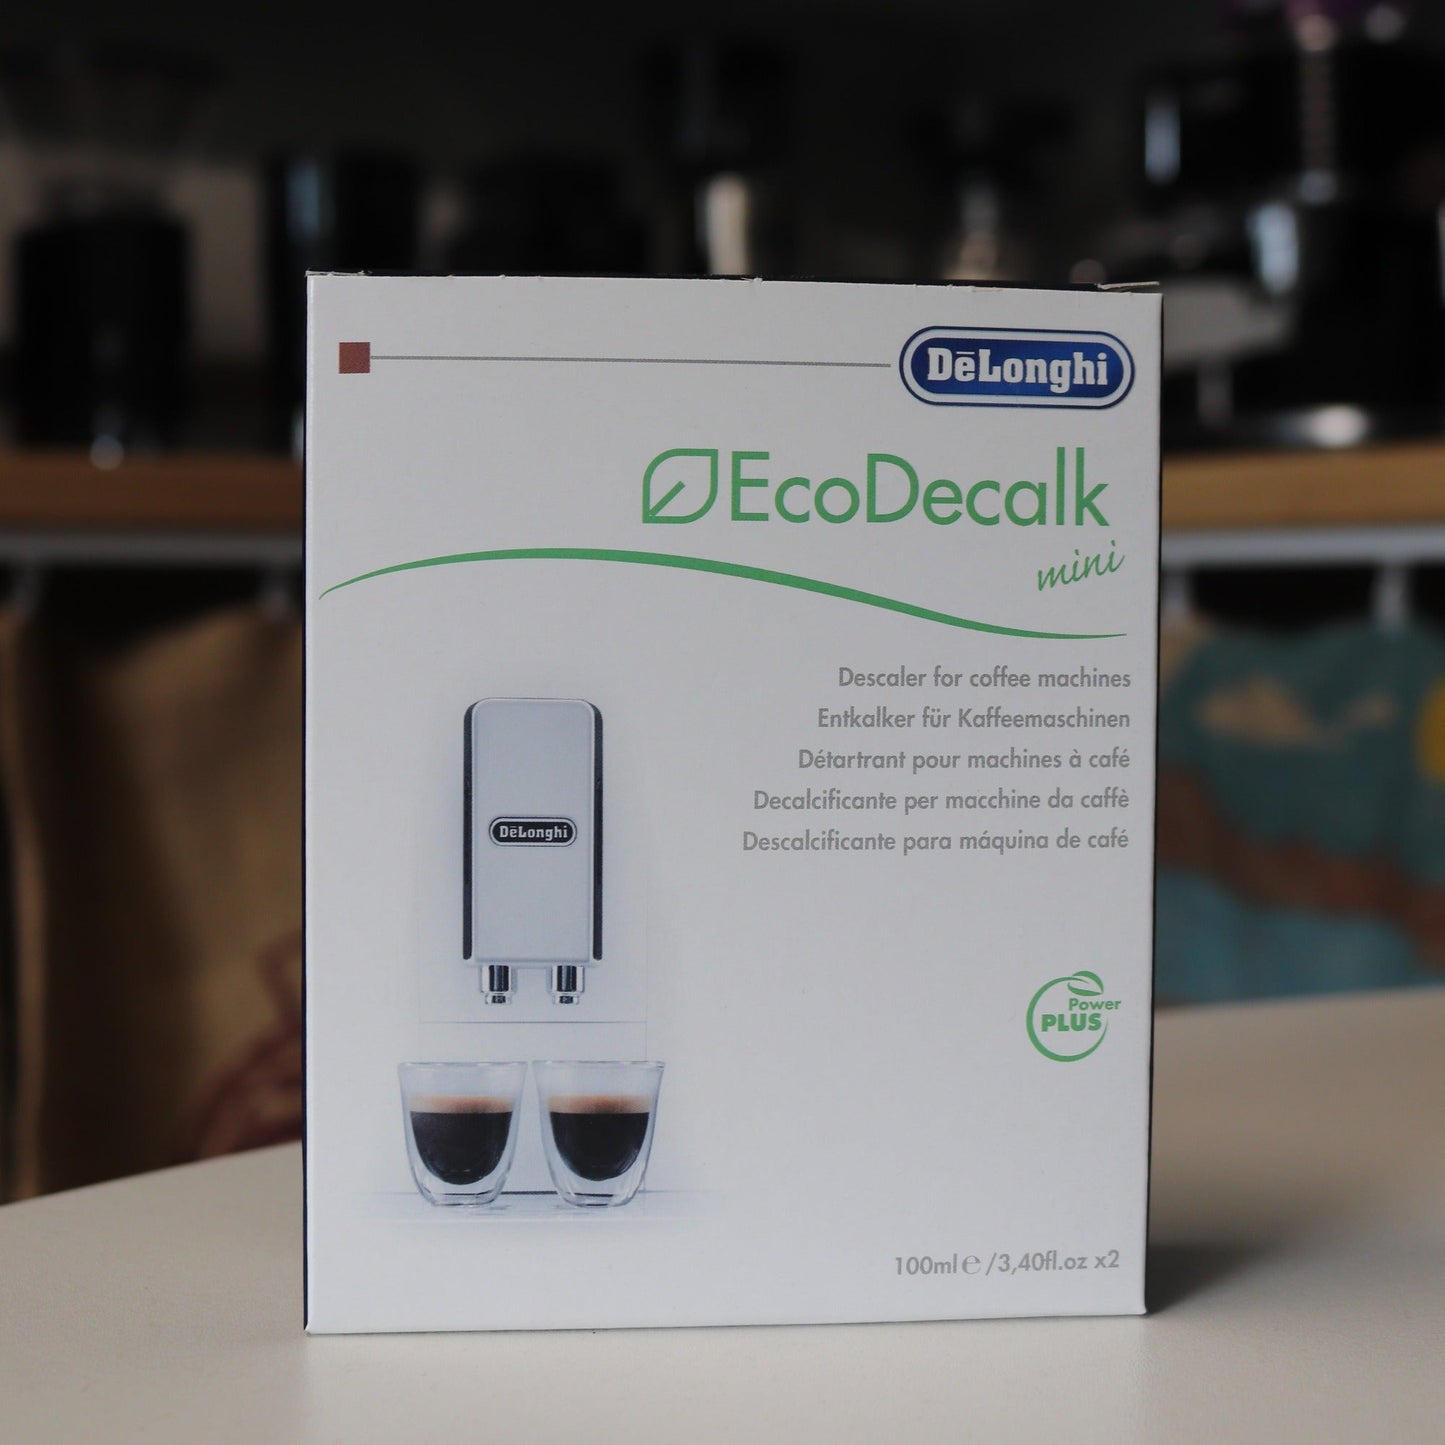 DeLonghi SER 2 x 3018 EcoDecalk for Coffee Fullyautomatic Descaler